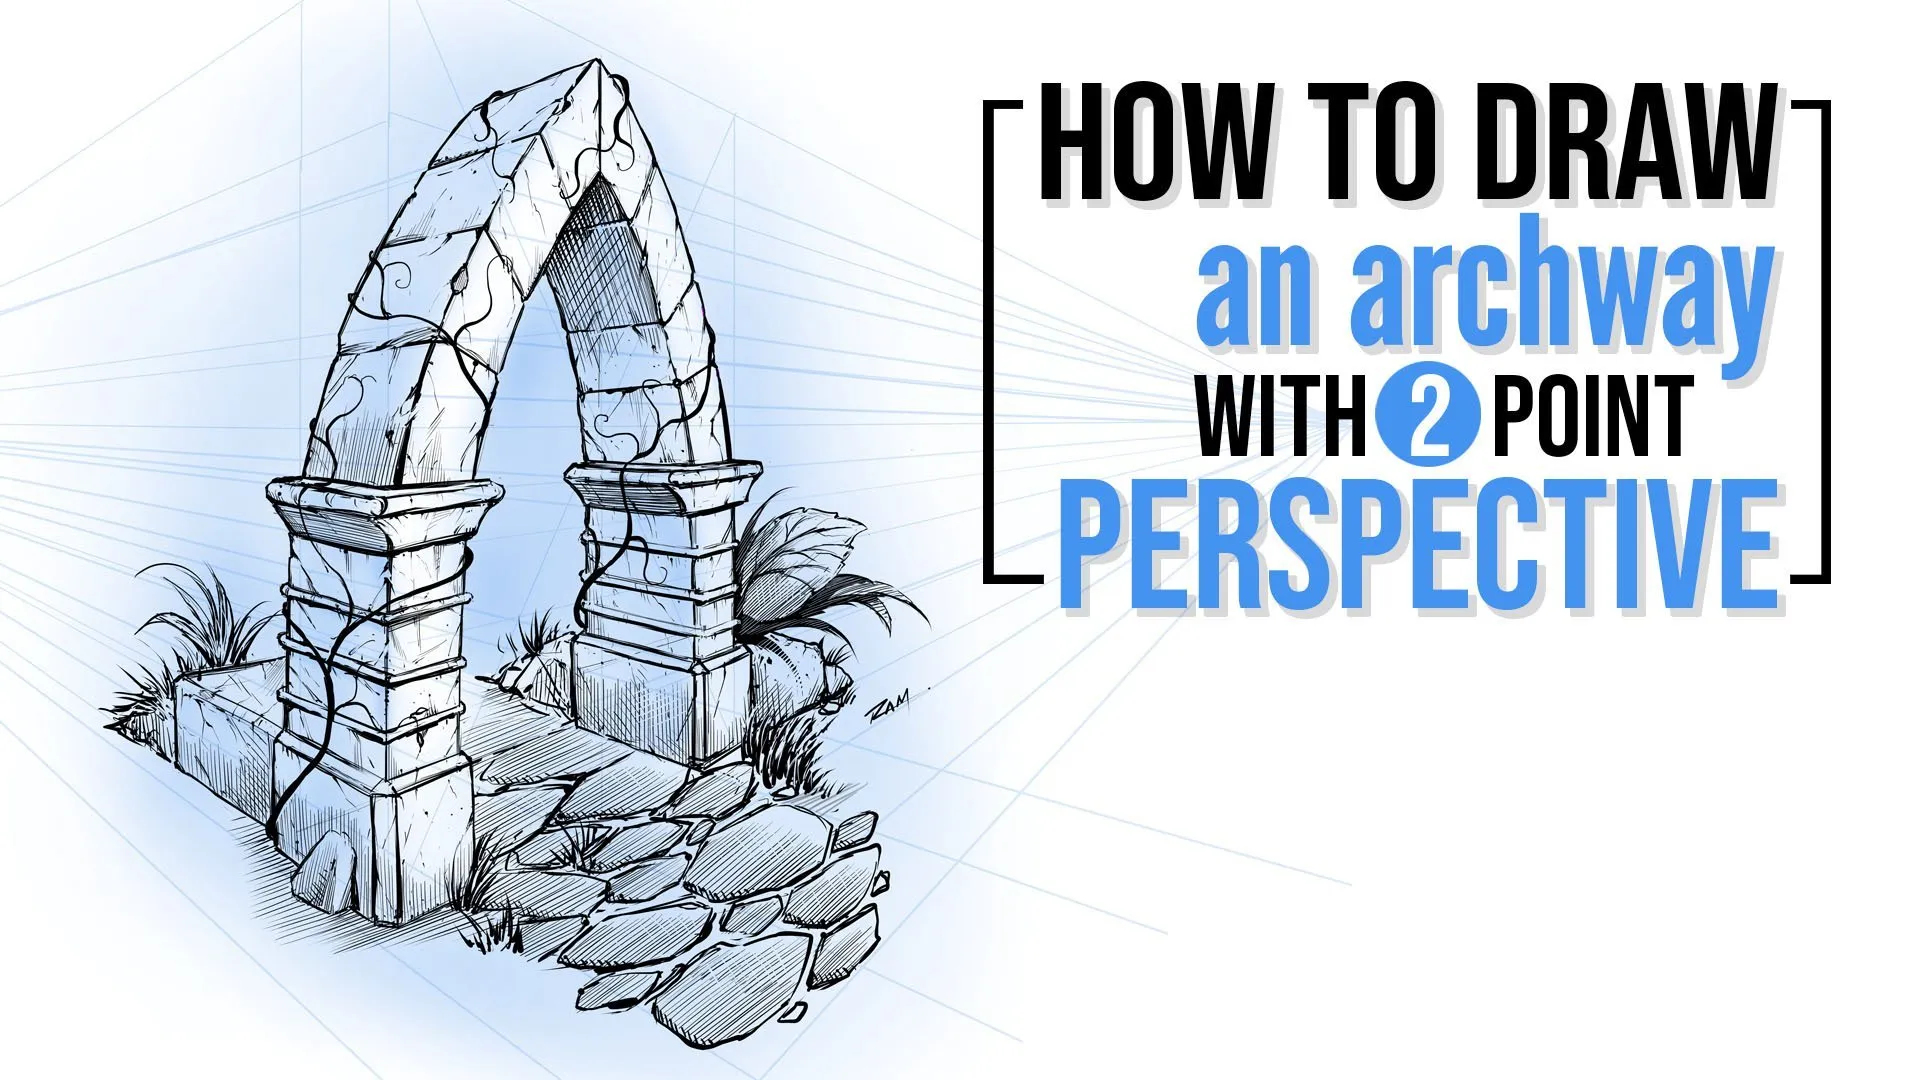 How to Draw an Archway in Perspective